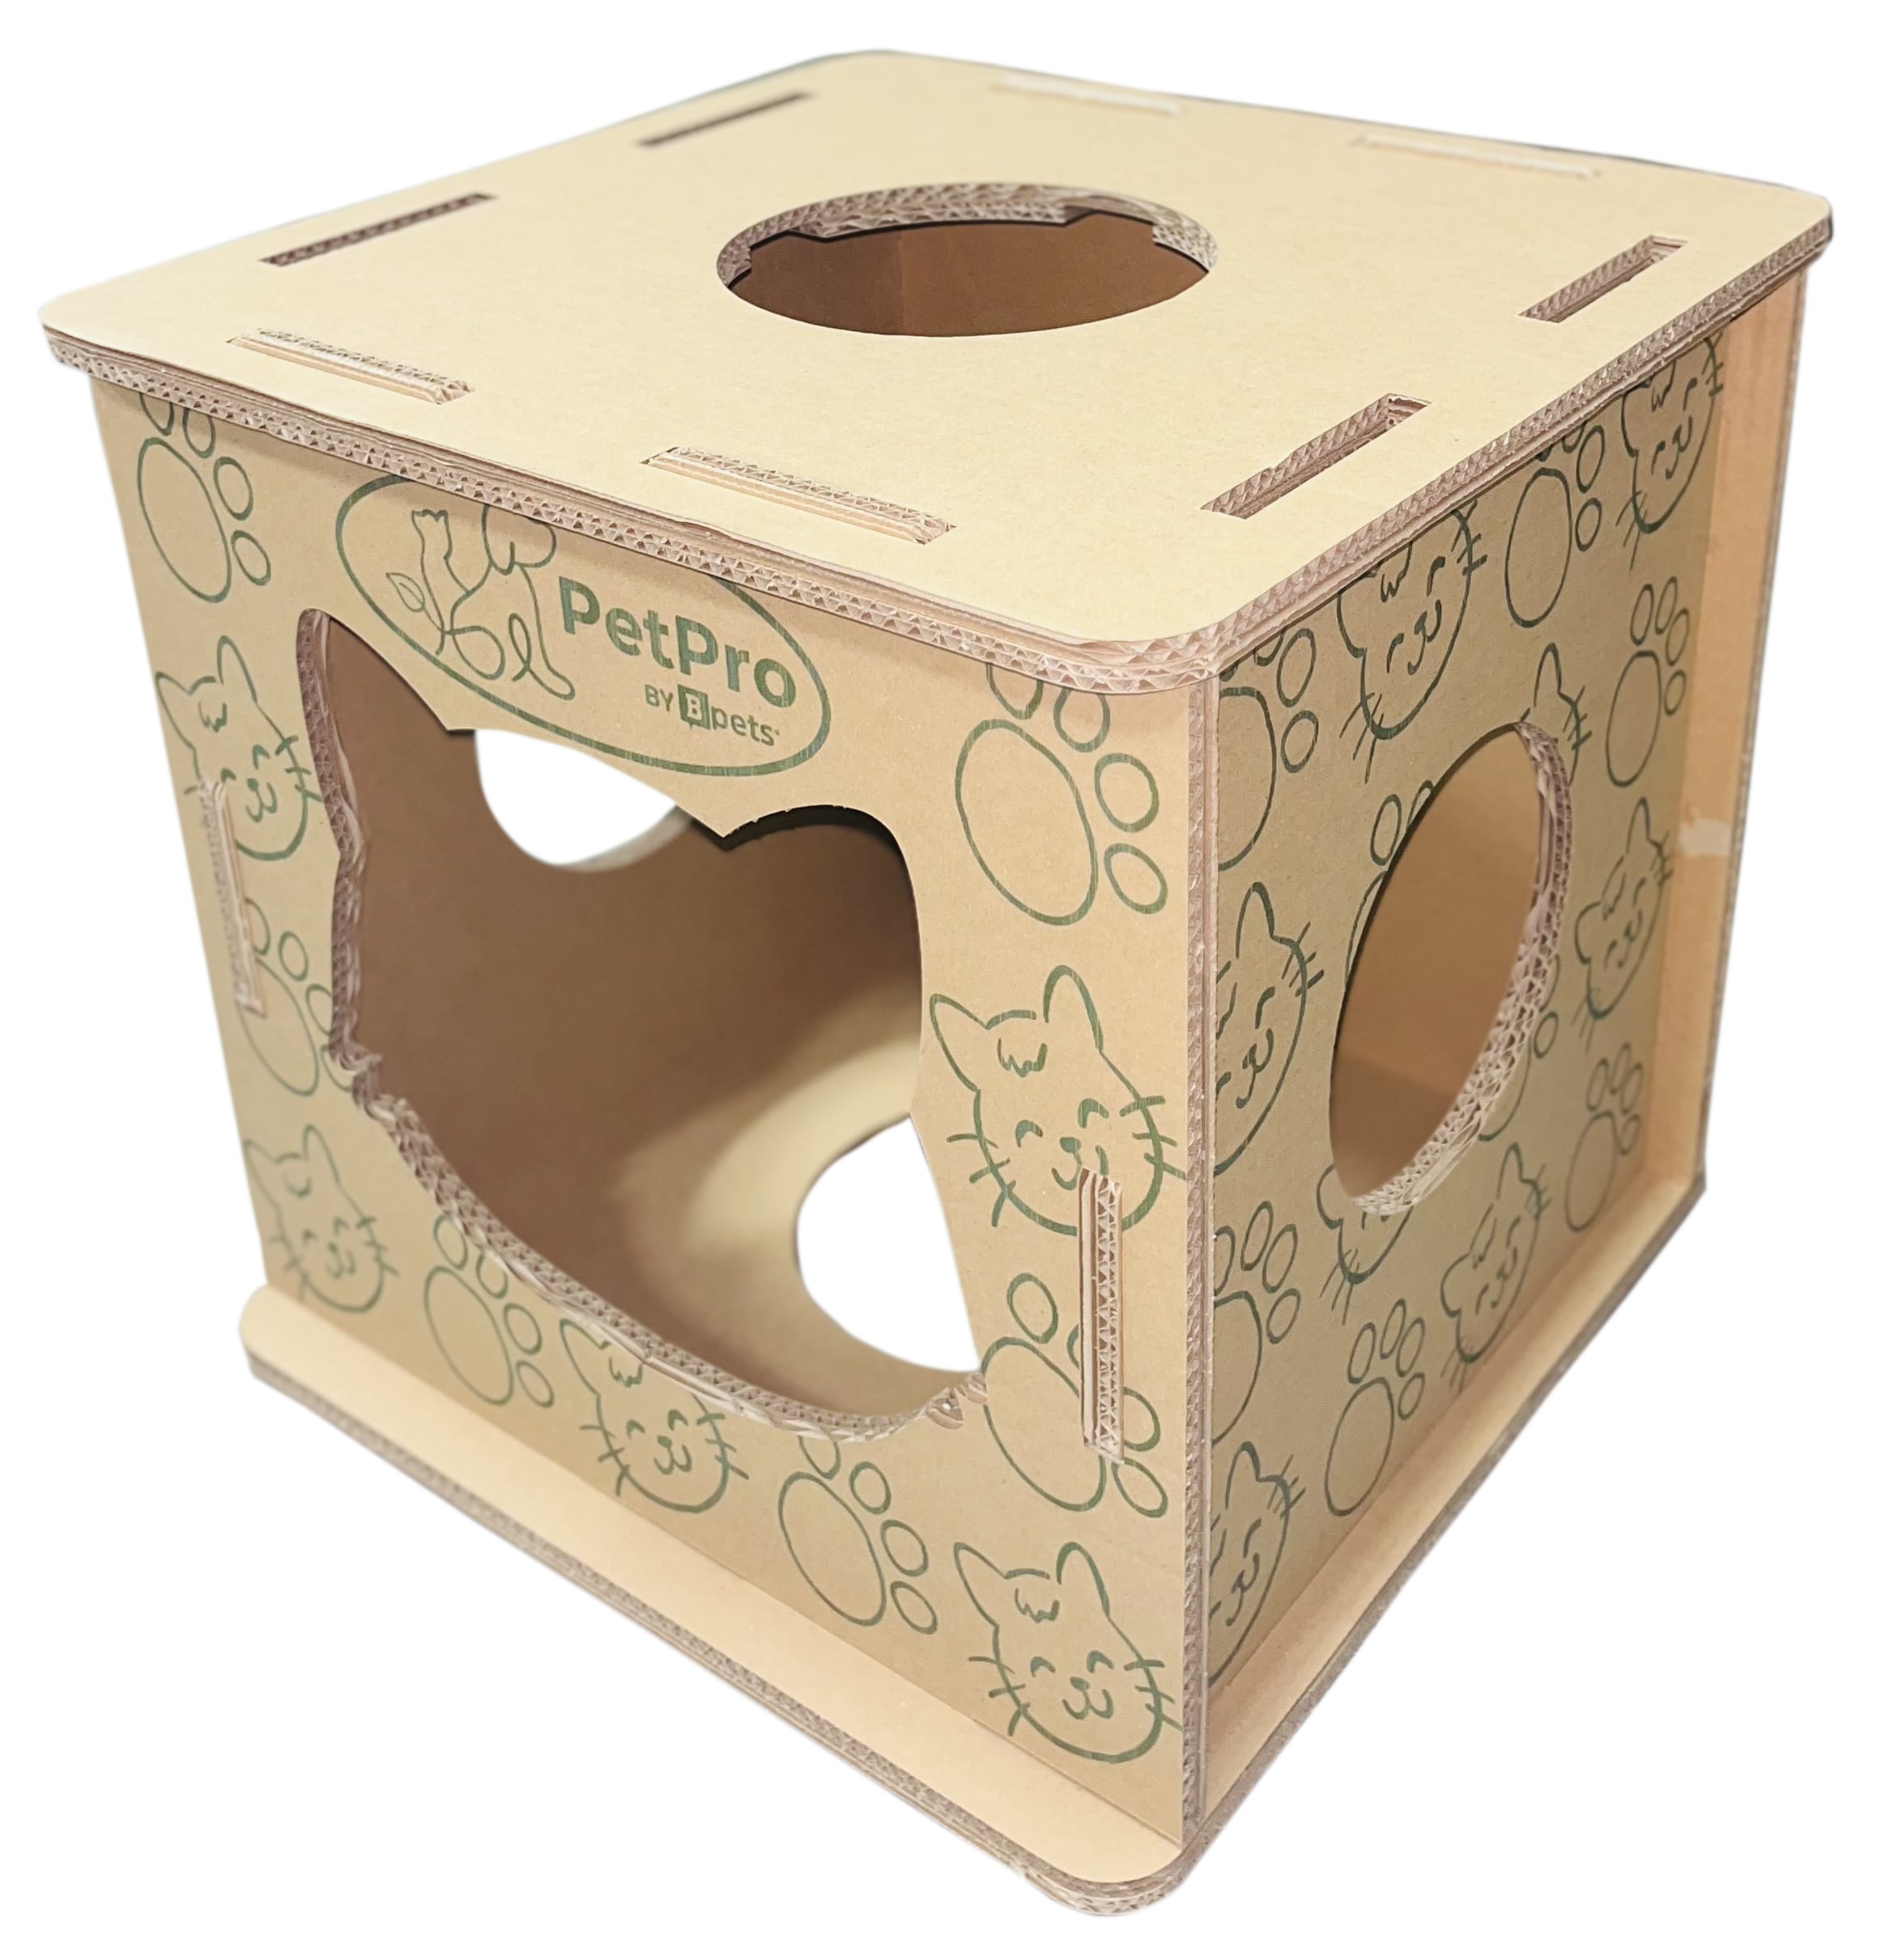 Corrugated Cardboard Cat Play Center, Scratching Box, Indoor Cat House, Cardboard Cat Condo, Cat Climber, Kitten Toy Box, Easy Assembly, Lightweight, Eco-Friendly Cat Furniture